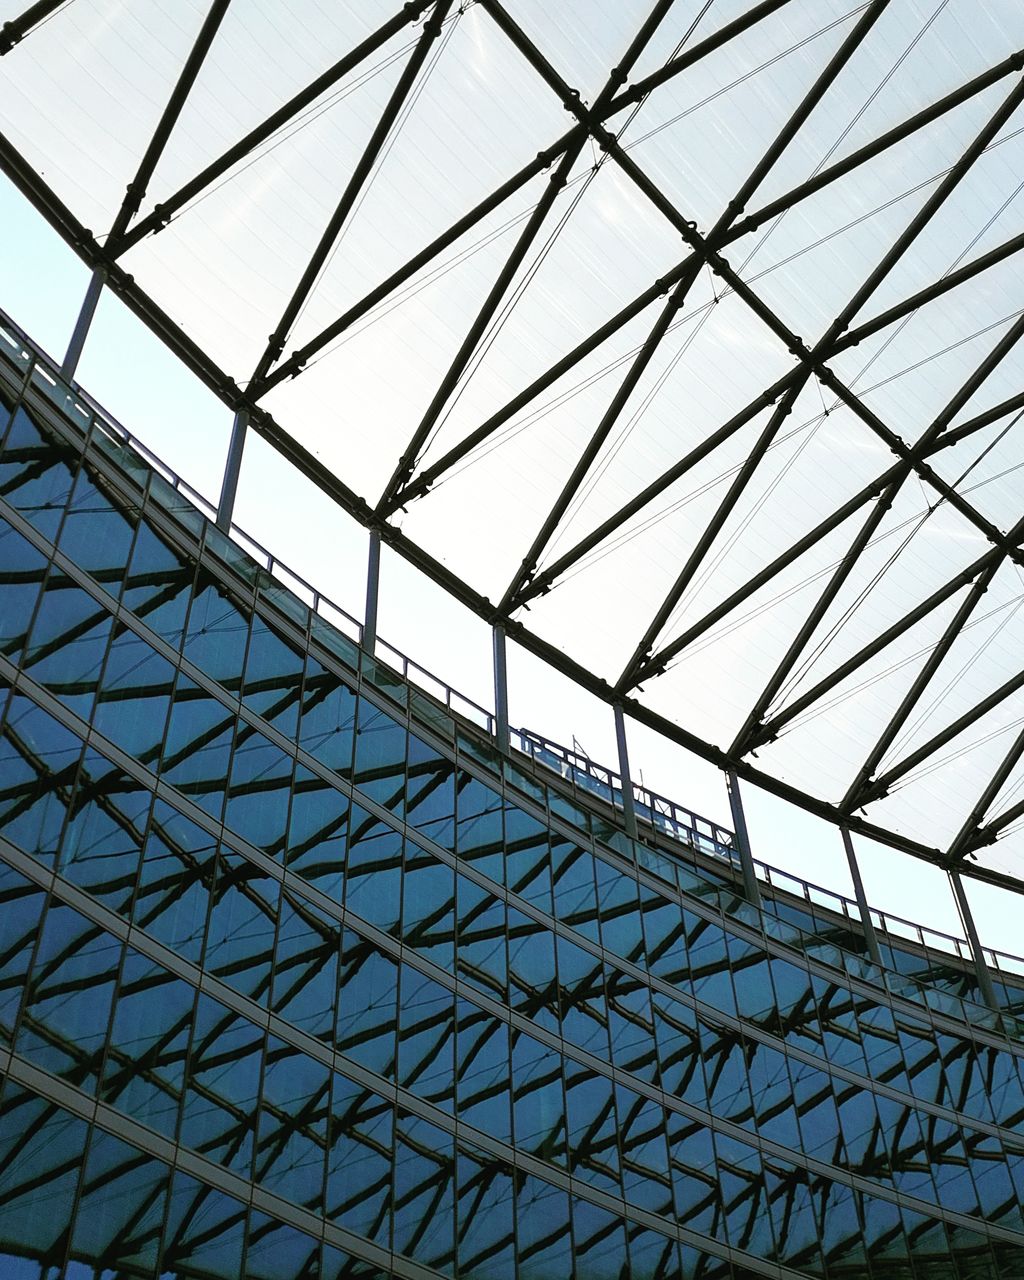 LOW ANGLE VIEW OF MODERN CEILING